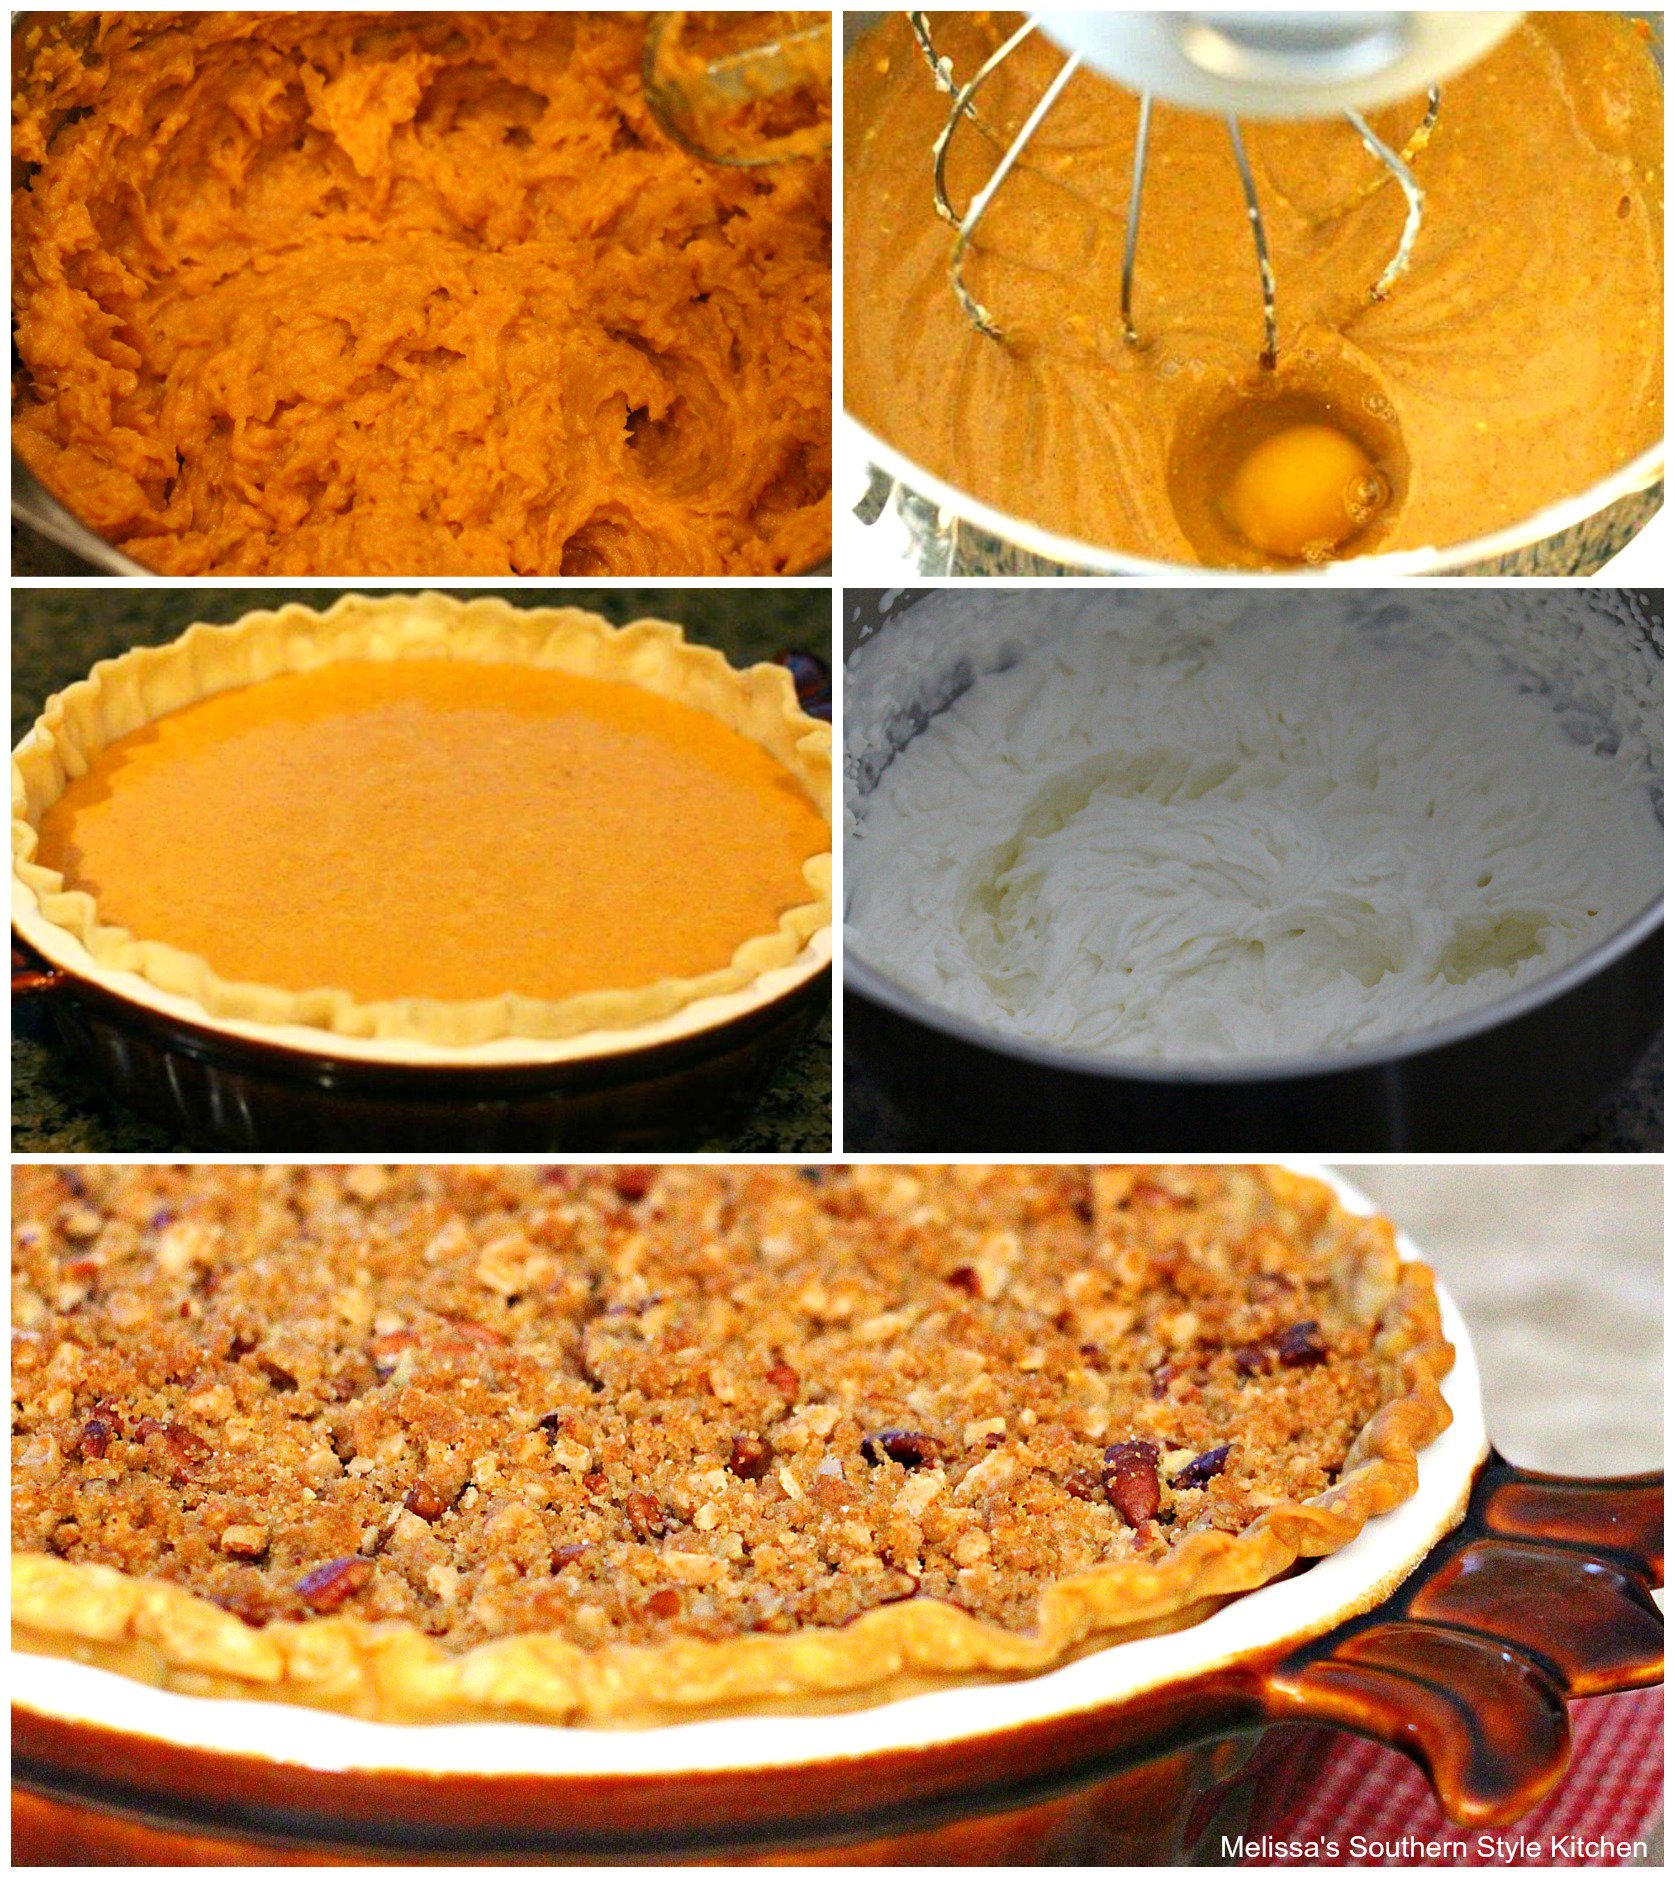 Sweet Potato Pie Melissassouthernstylekitchen Com,Learn How To Crochet For Beginners